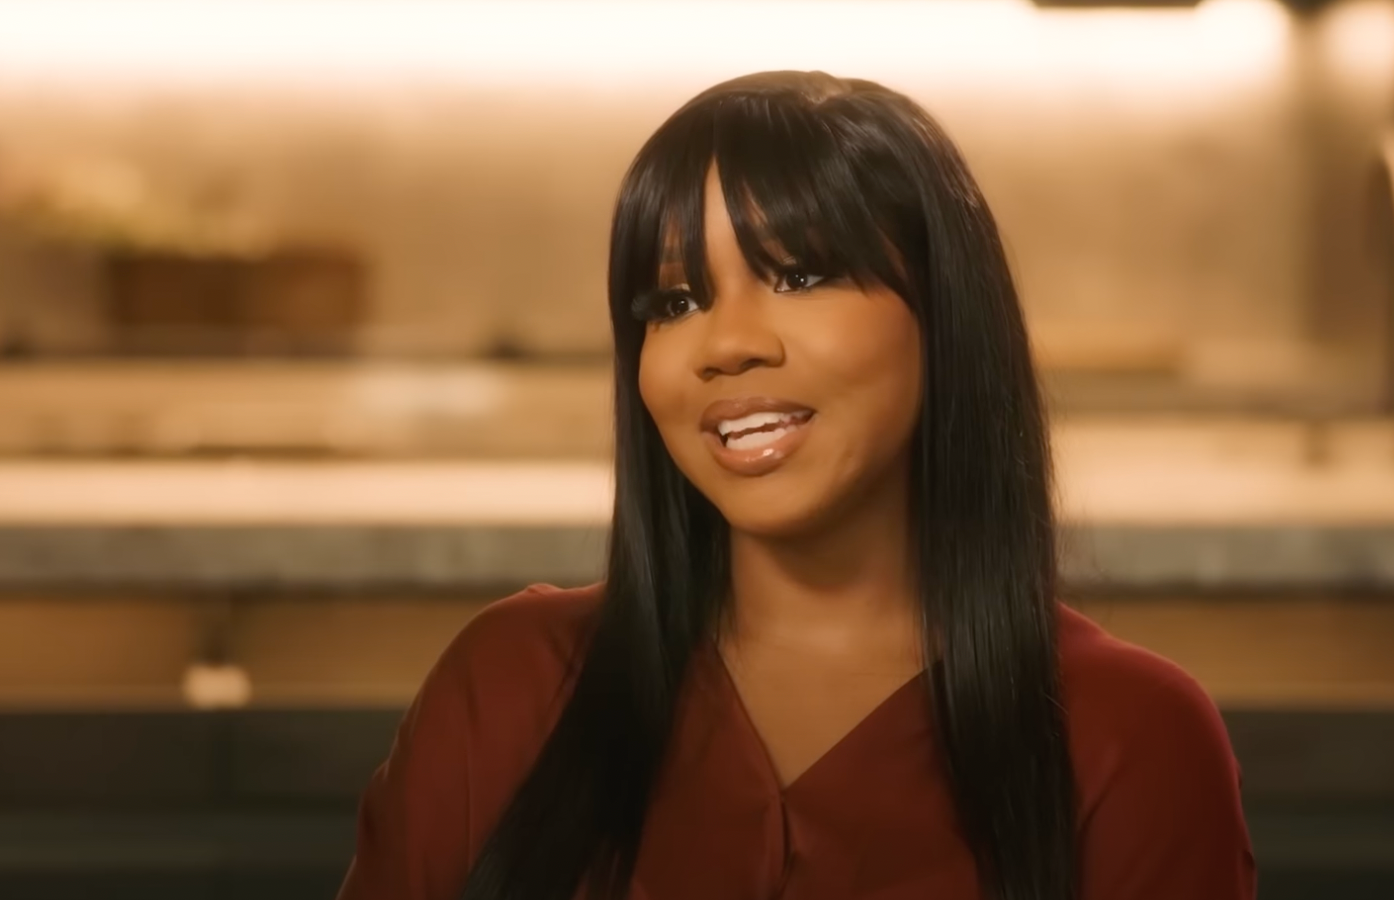 Watch: Sarah Jakes Roberts Life Lessons on Trust